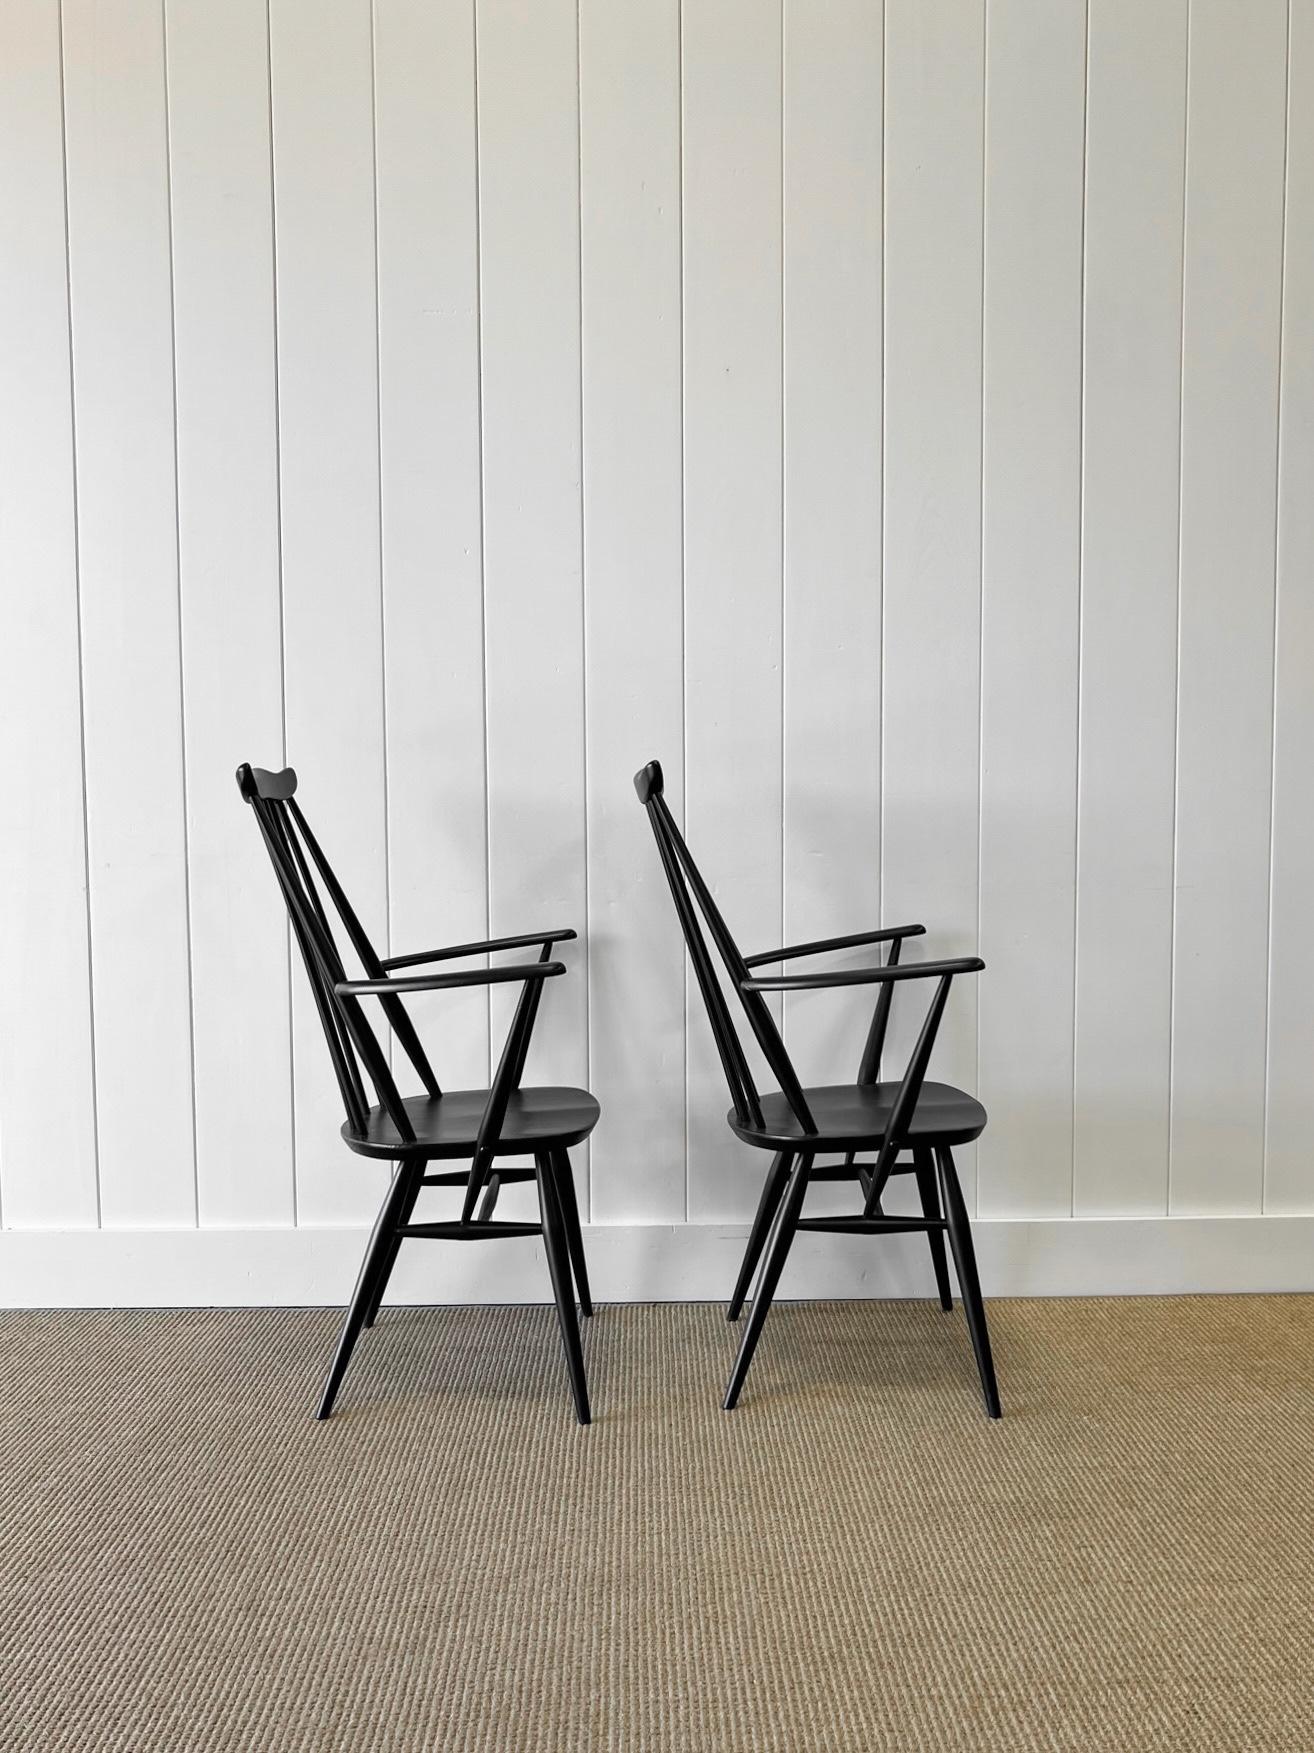 A Set of 4 Black Ercol Chairs In Good Condition For Sale In Oak Park, MI